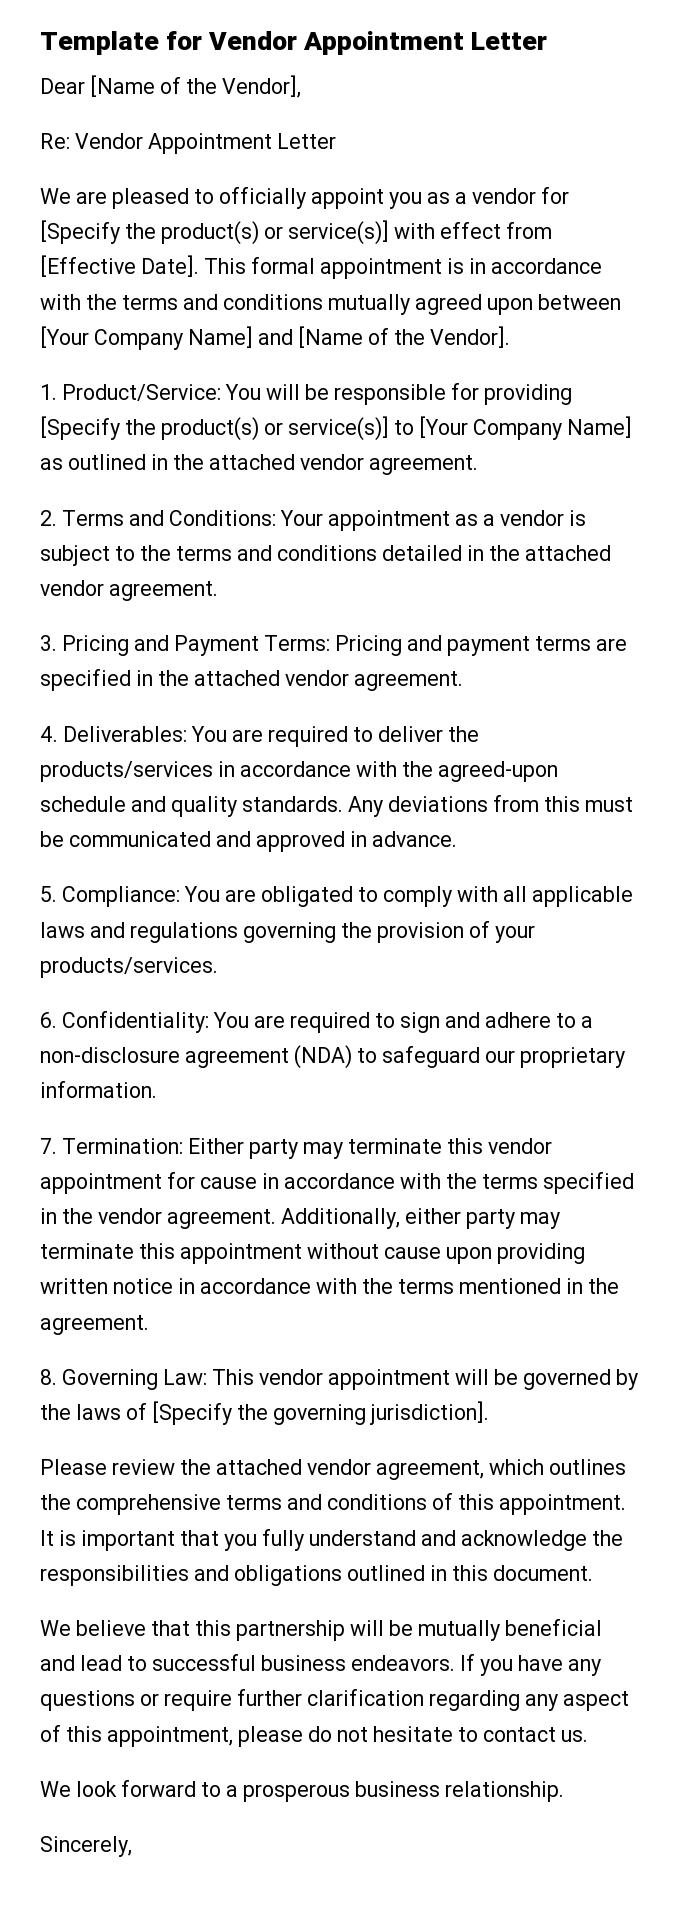 Template for Vendor Appointment Letter